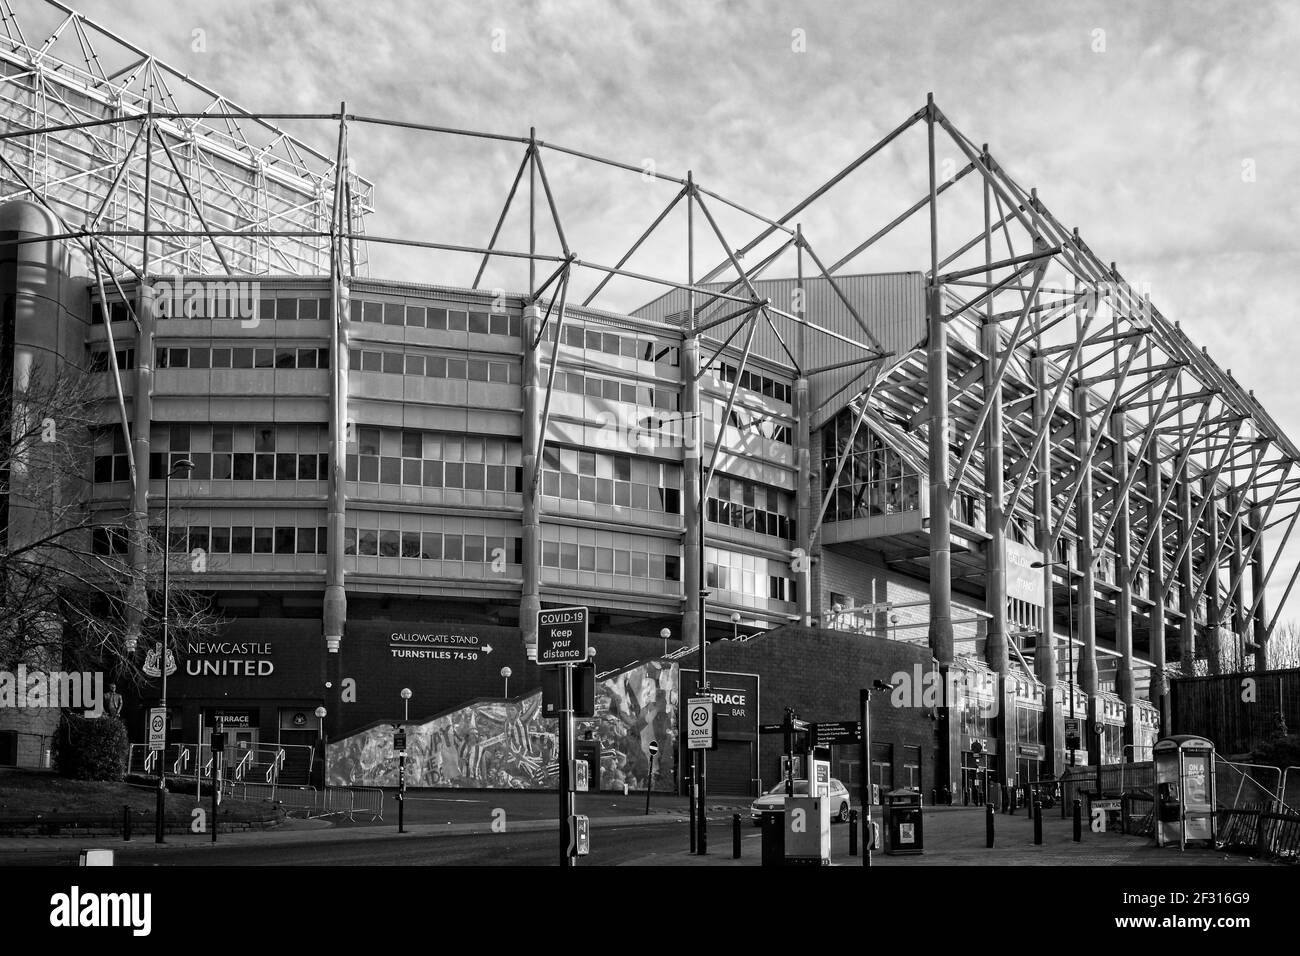 The football stadium at St James Park in Newcastle, Tyne and Wear. Home of Newcastle United Football Club.. Stock Photo